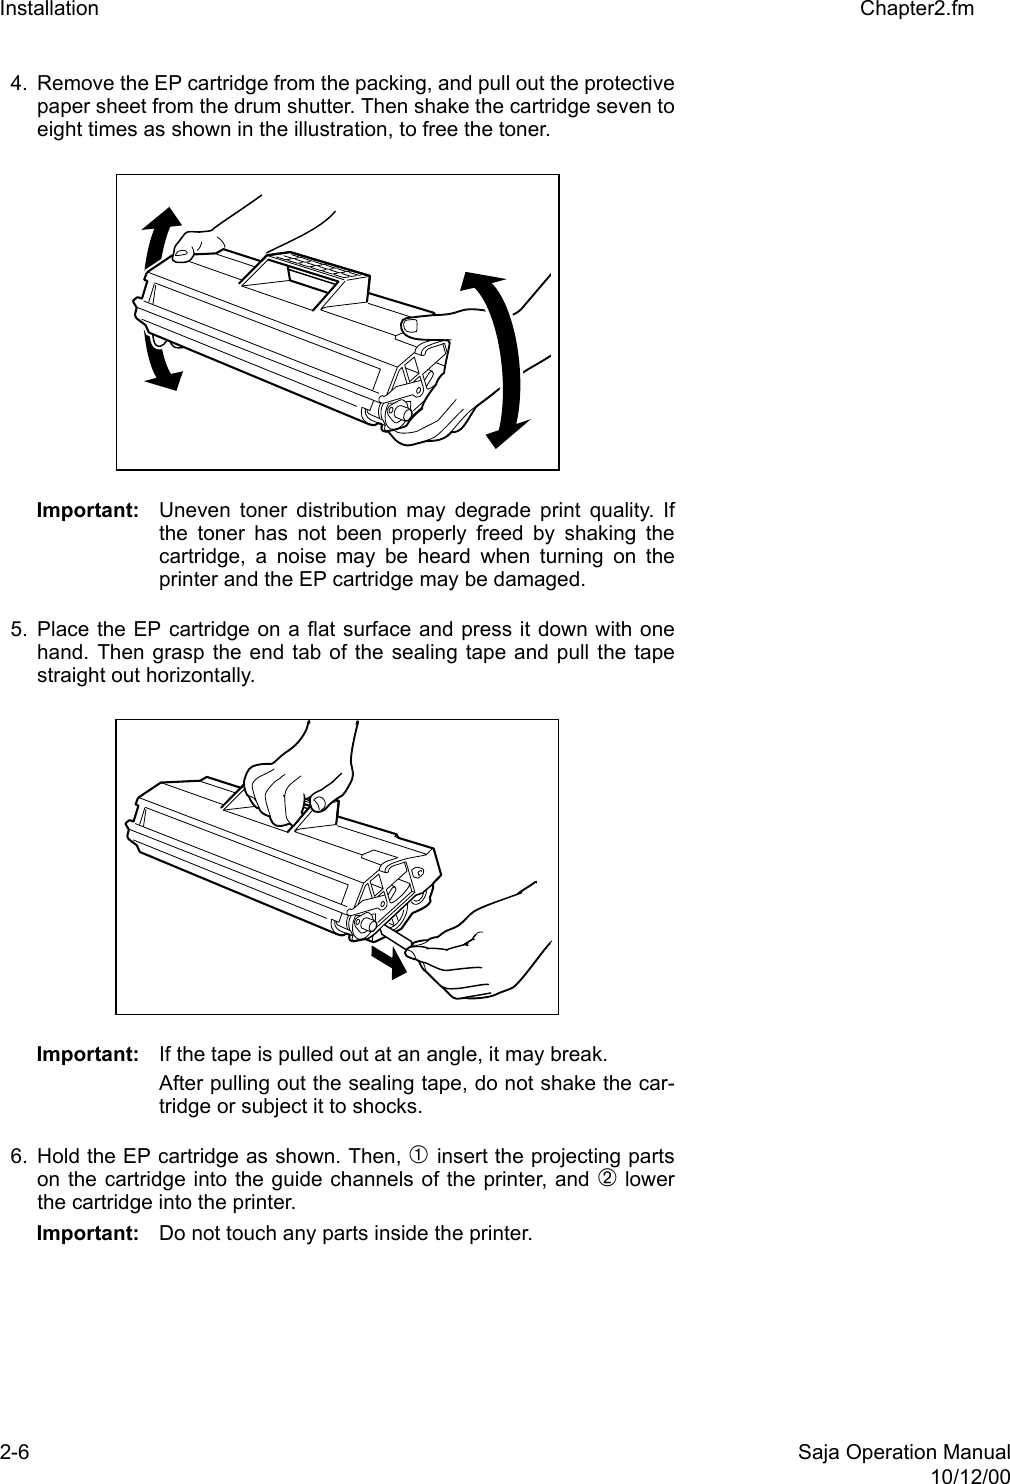 2-6 Saja Operation Manual10/12/00Installation Chapter2.fm4. Remove the EP cartridge from the packing, and pull out the protectivepaper sheet from the drum shutter. Then shake the cartridge seven toeight times as shown in the illustration, to free the toner. Important: Uneven toner distribution may degrade print quality. Ifthe toner has not been properly freed by shaking thecartridge, a noise may be heard when turning on theprinter and the EP cartridge may be damaged. 5. Place the EP cartridge on a flat surface and press it down with onehand. Then grasp the end tab of the sealing tape and pull the tapestraight out horizontally. Important: If the tape is pulled out at an angle, it may break. After pulling out the sealing tape, do not shake the car-tridge or subject it to shocks. 6. Hold the EP cartridge as shown. Then, ➀ insert the projecting partson the cartridge into the guide channels of the printer, and ➁ lowerthe cartridge into the printer. Important: Do not touch any parts inside the printer. 